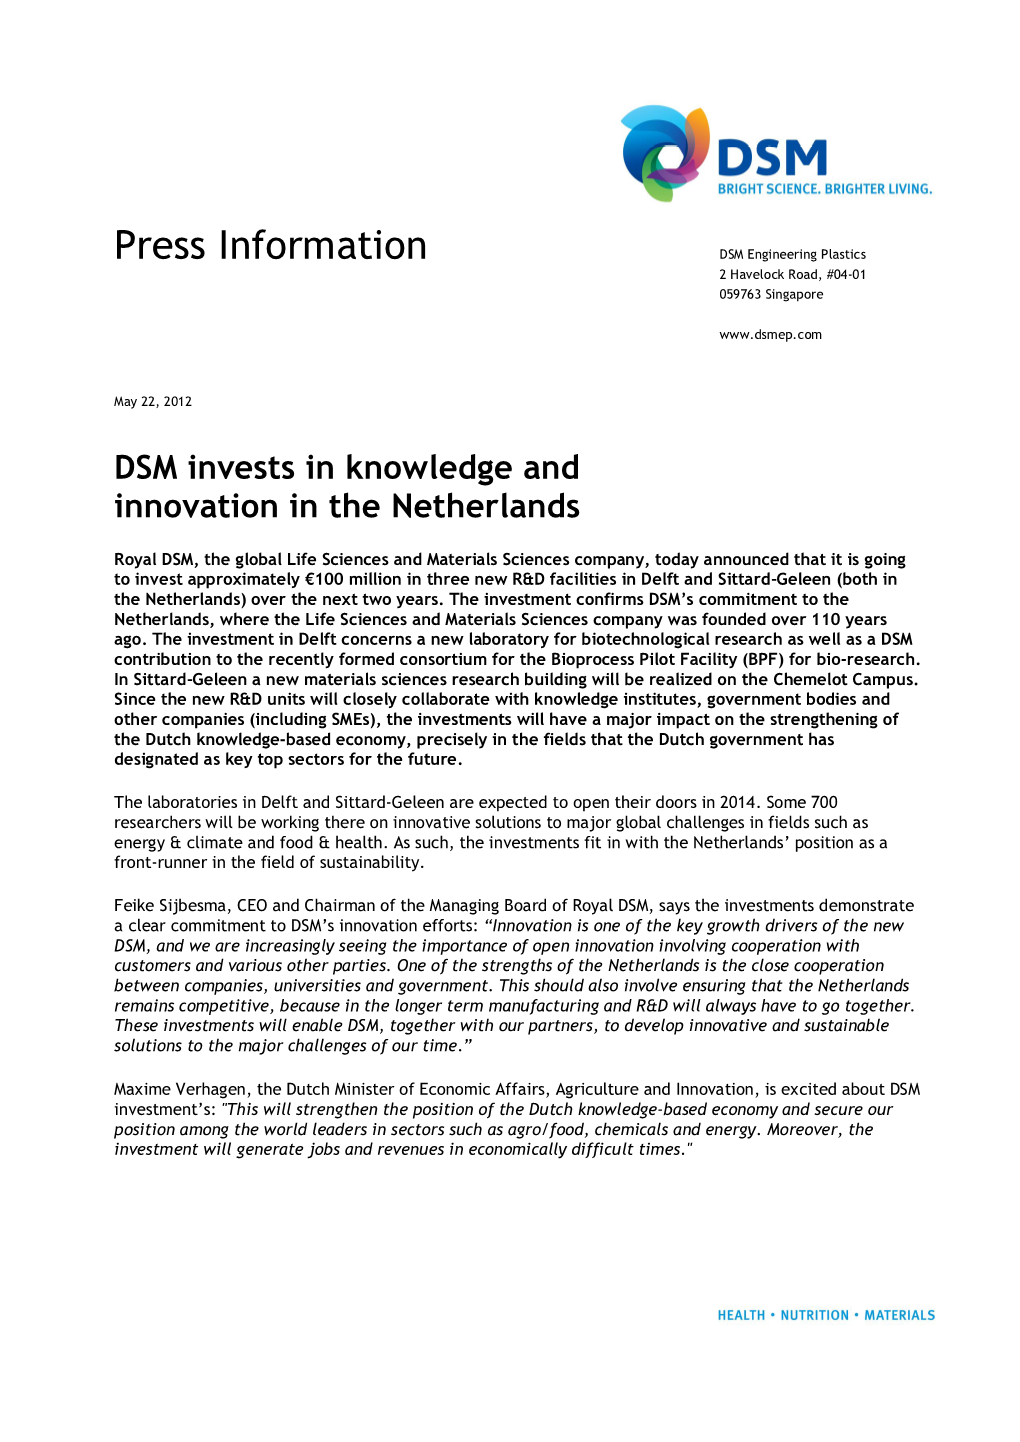 DSM Invests in Knowledge and Innovation in the Netherlands